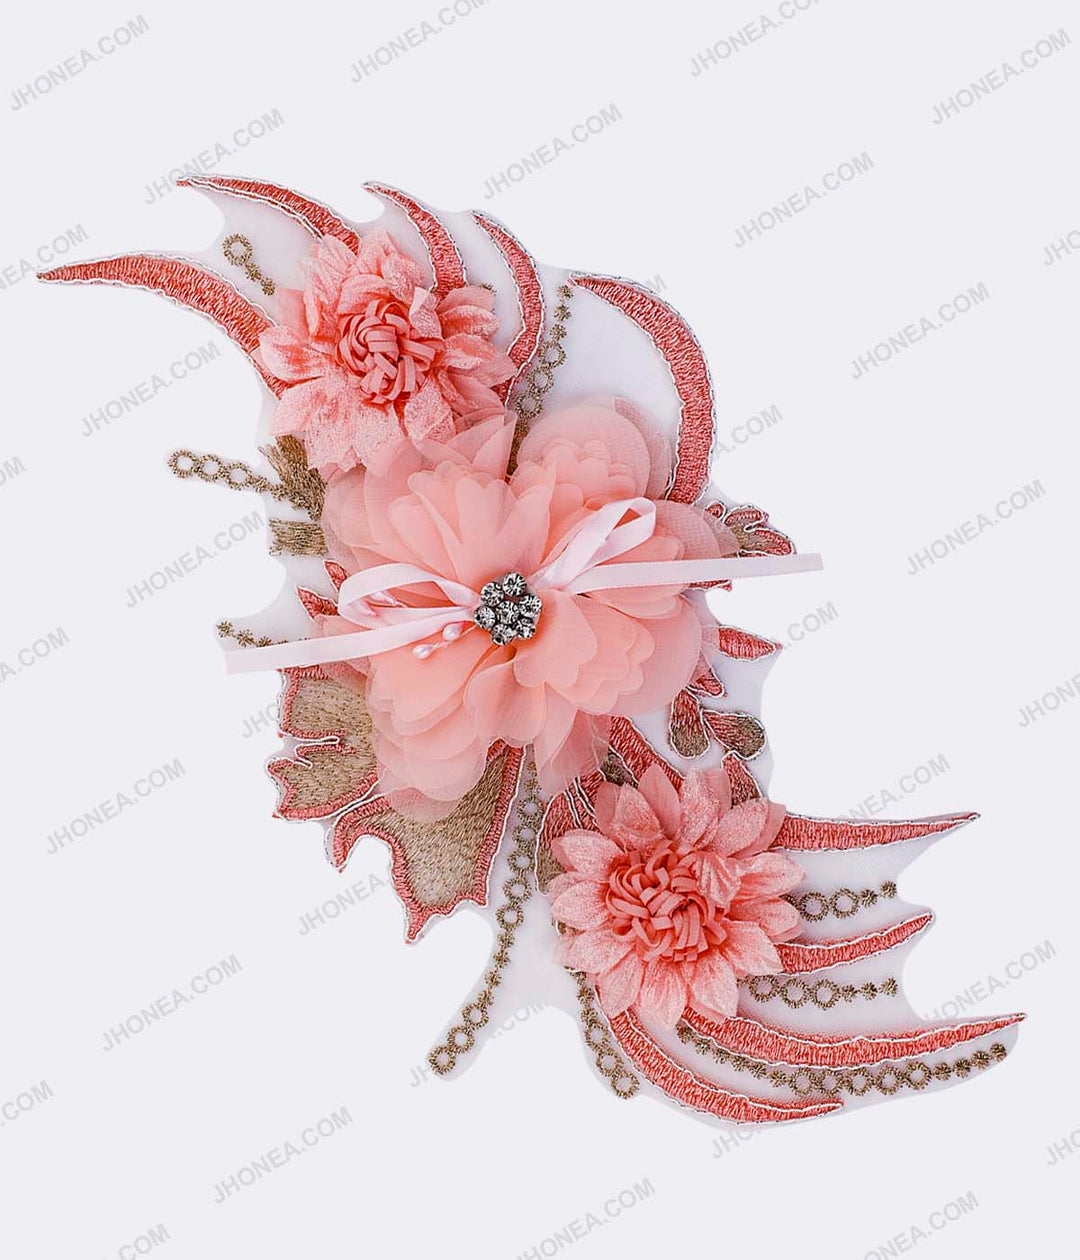 Peach with Metallic Gold Flower Embroidery Patch